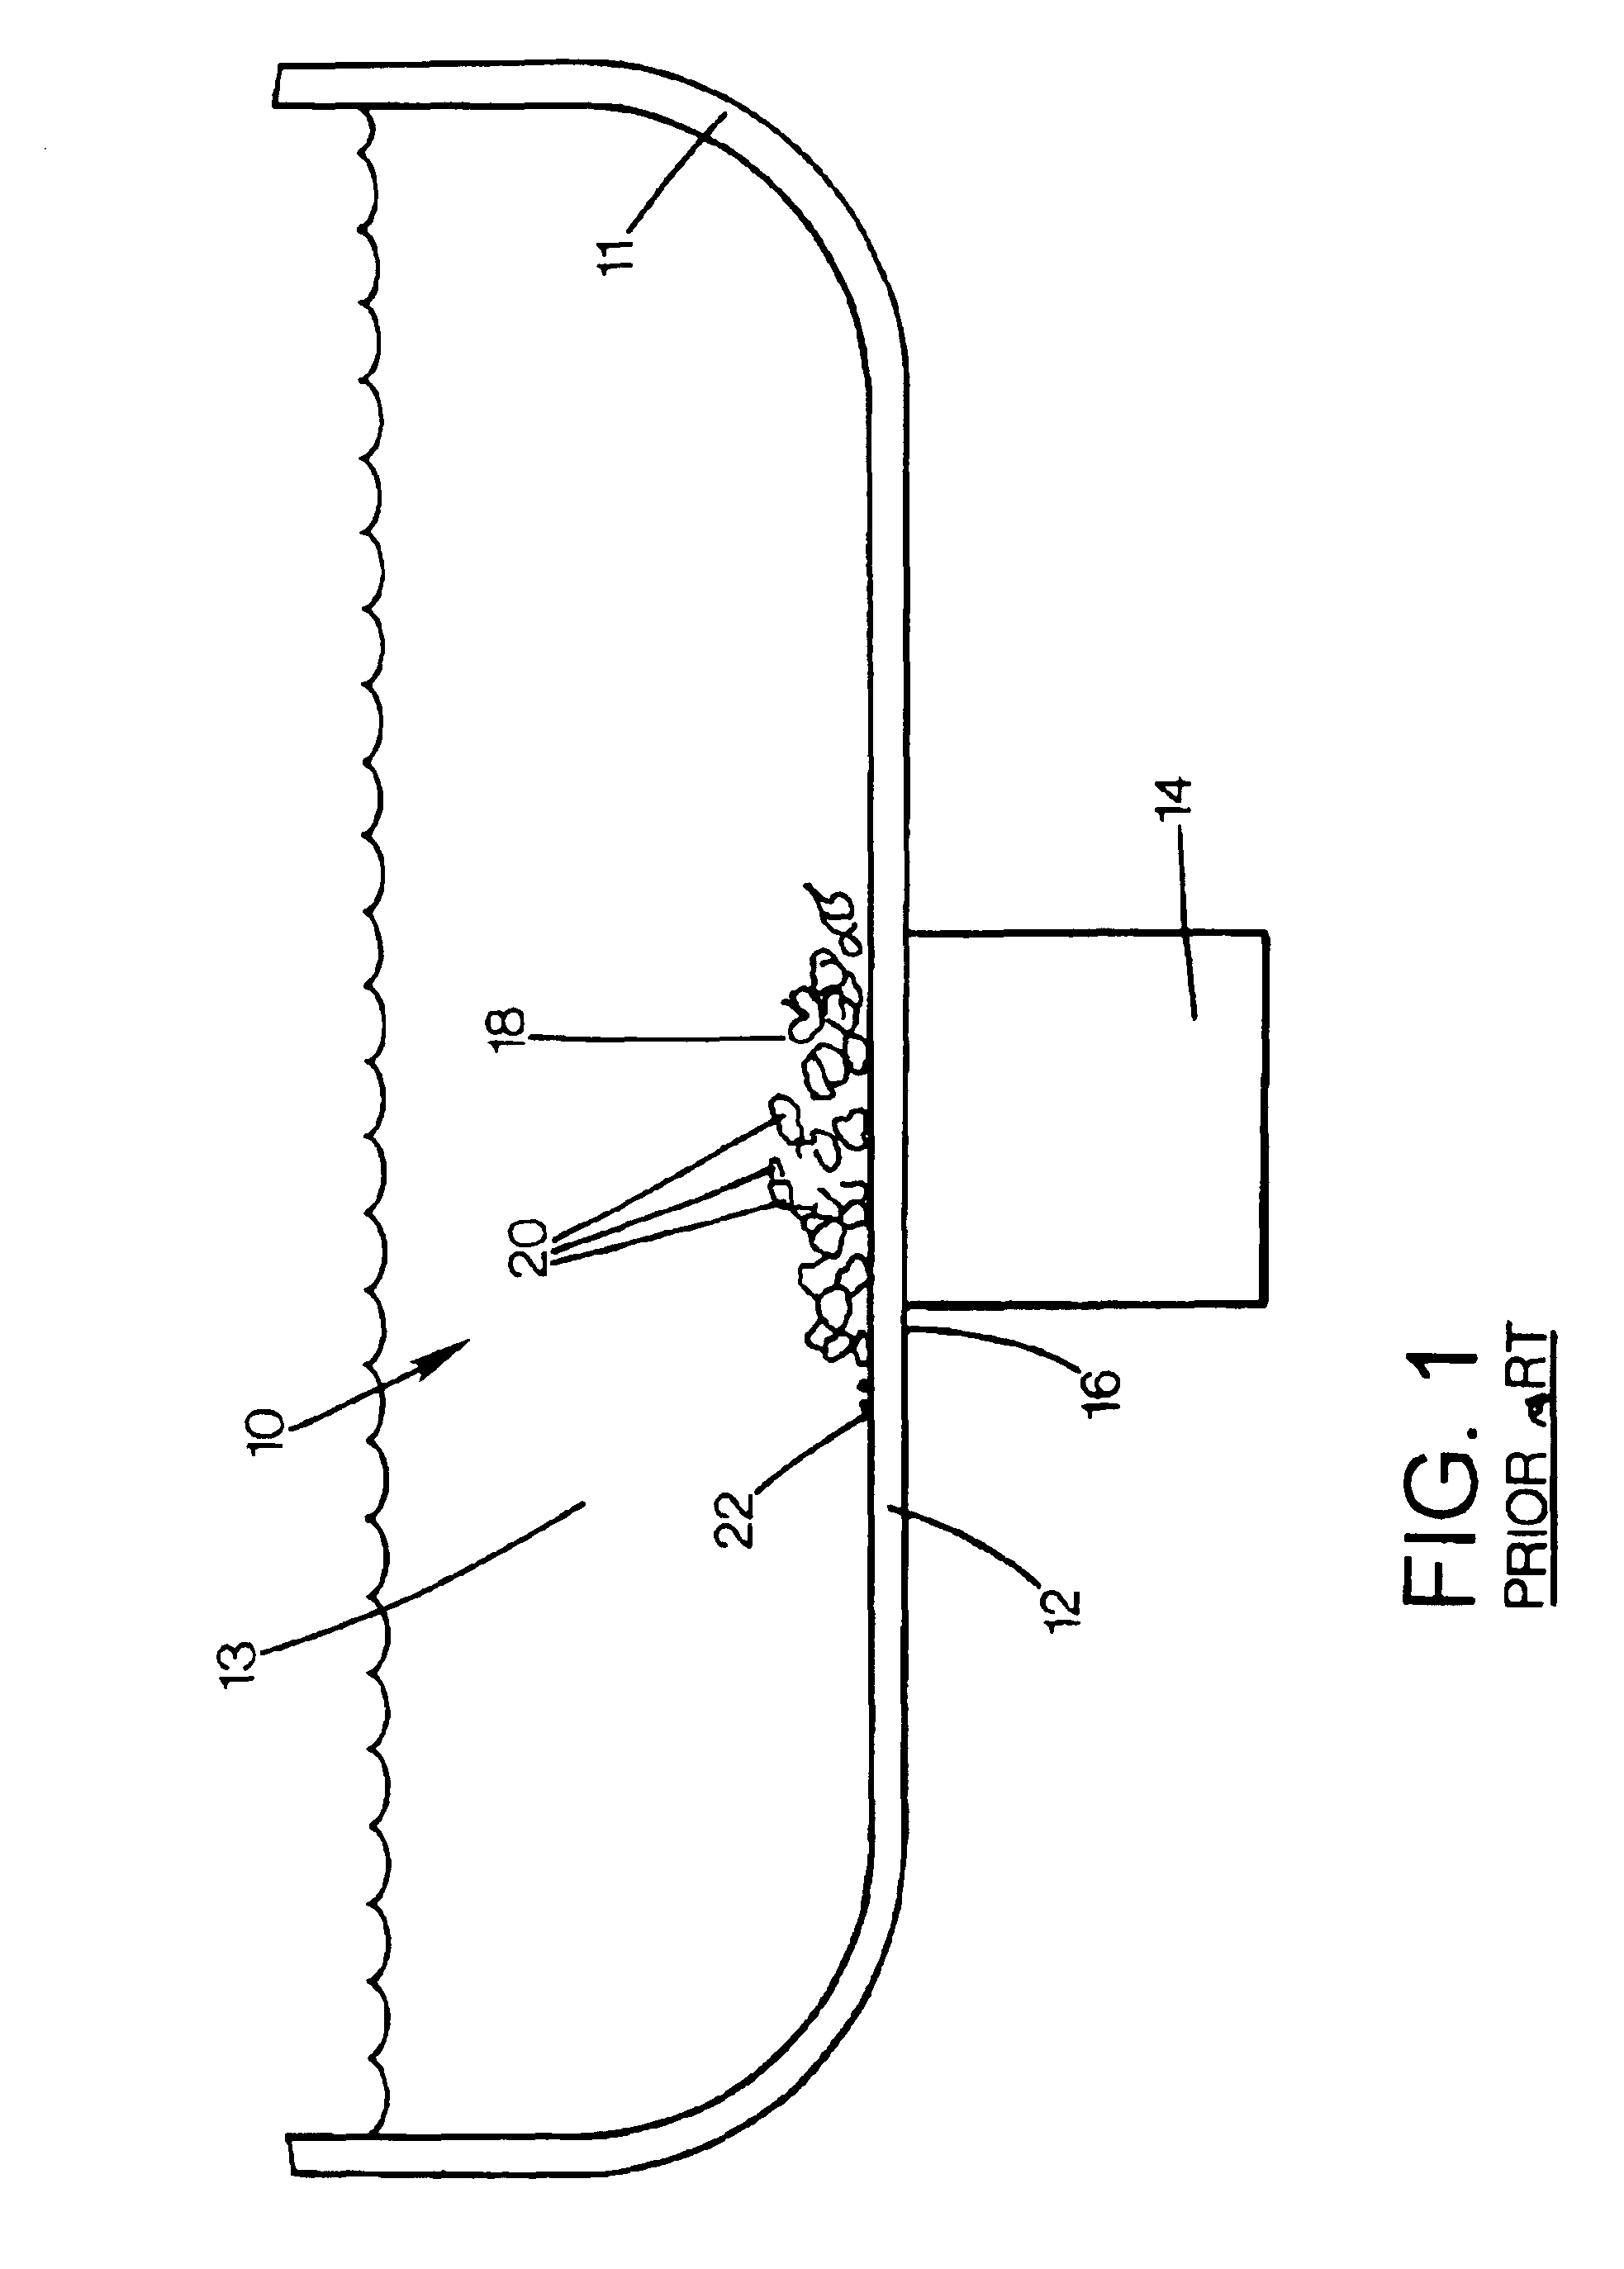 Method for treating a medium with ultrasonic transducers